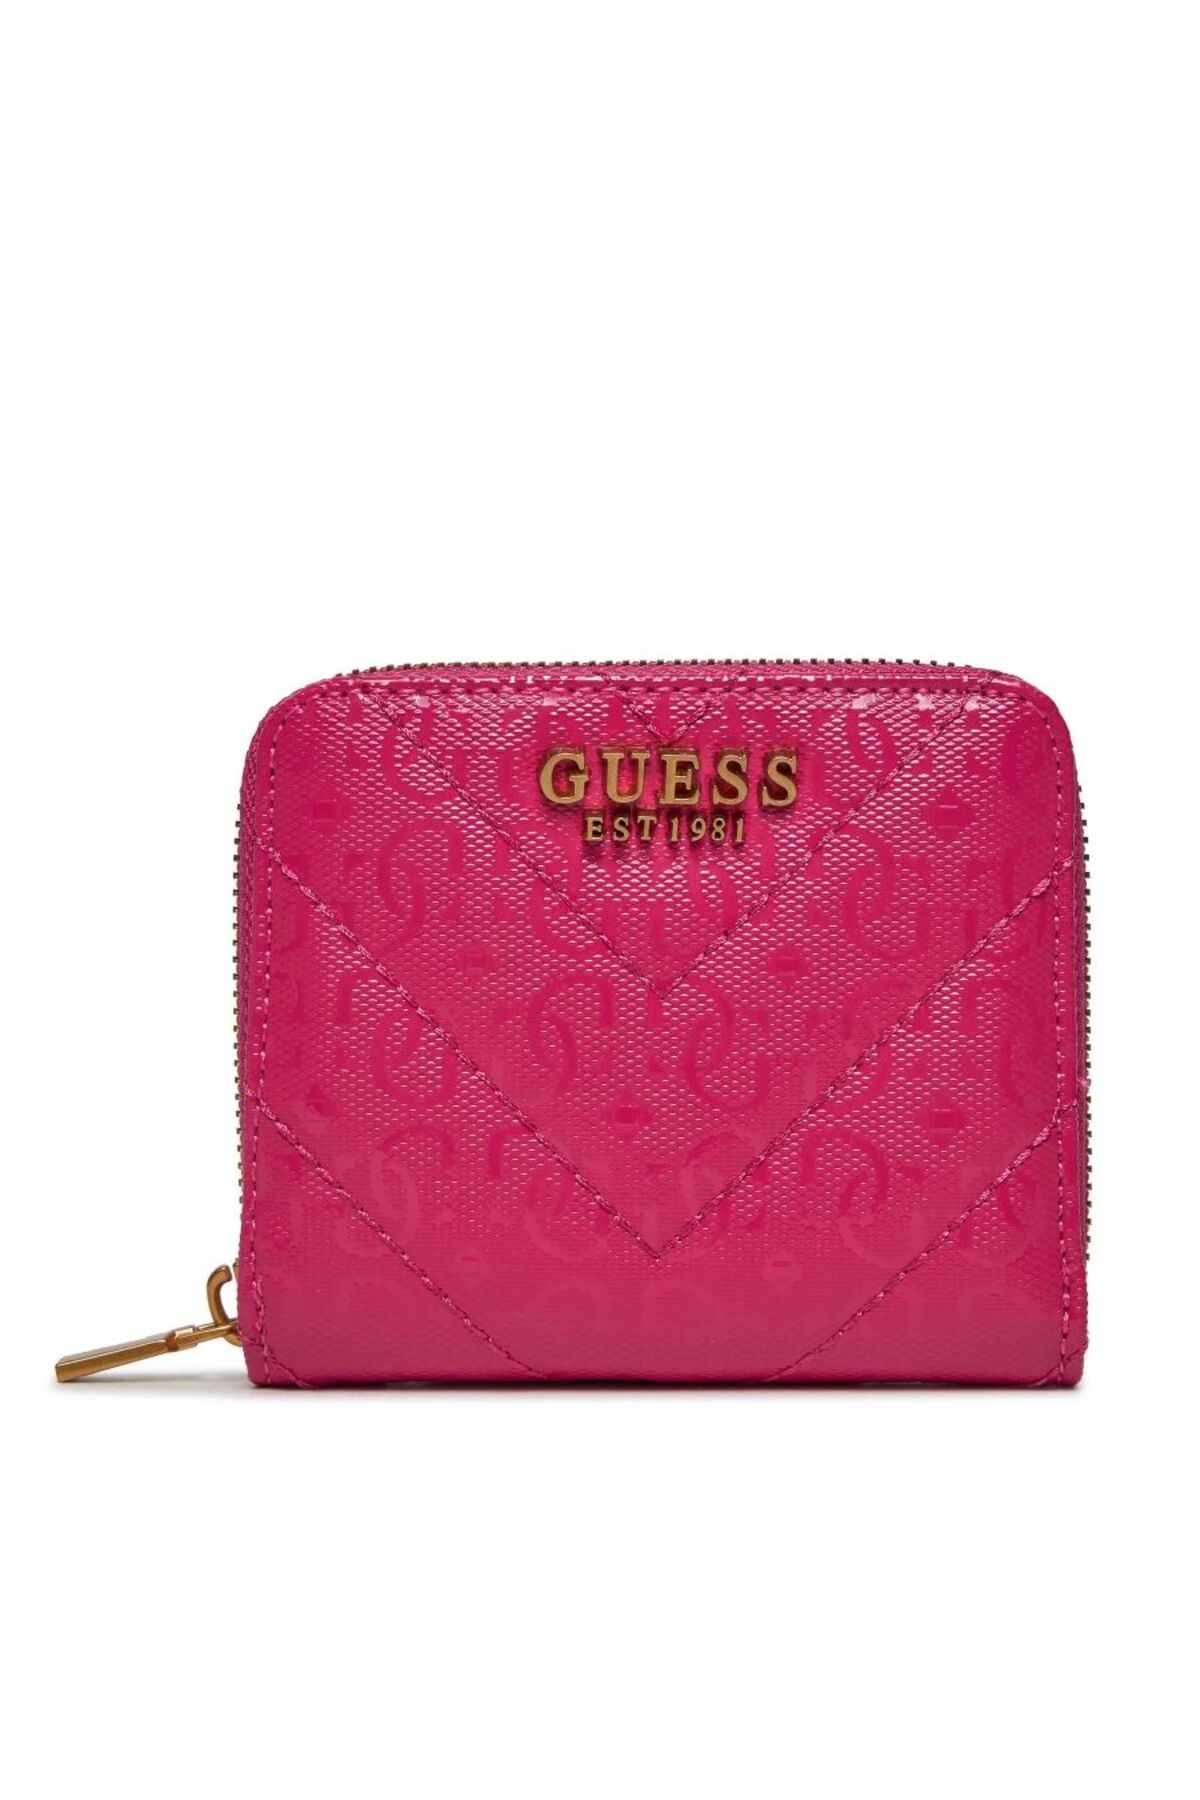 Guess JANIA SLG SMALL